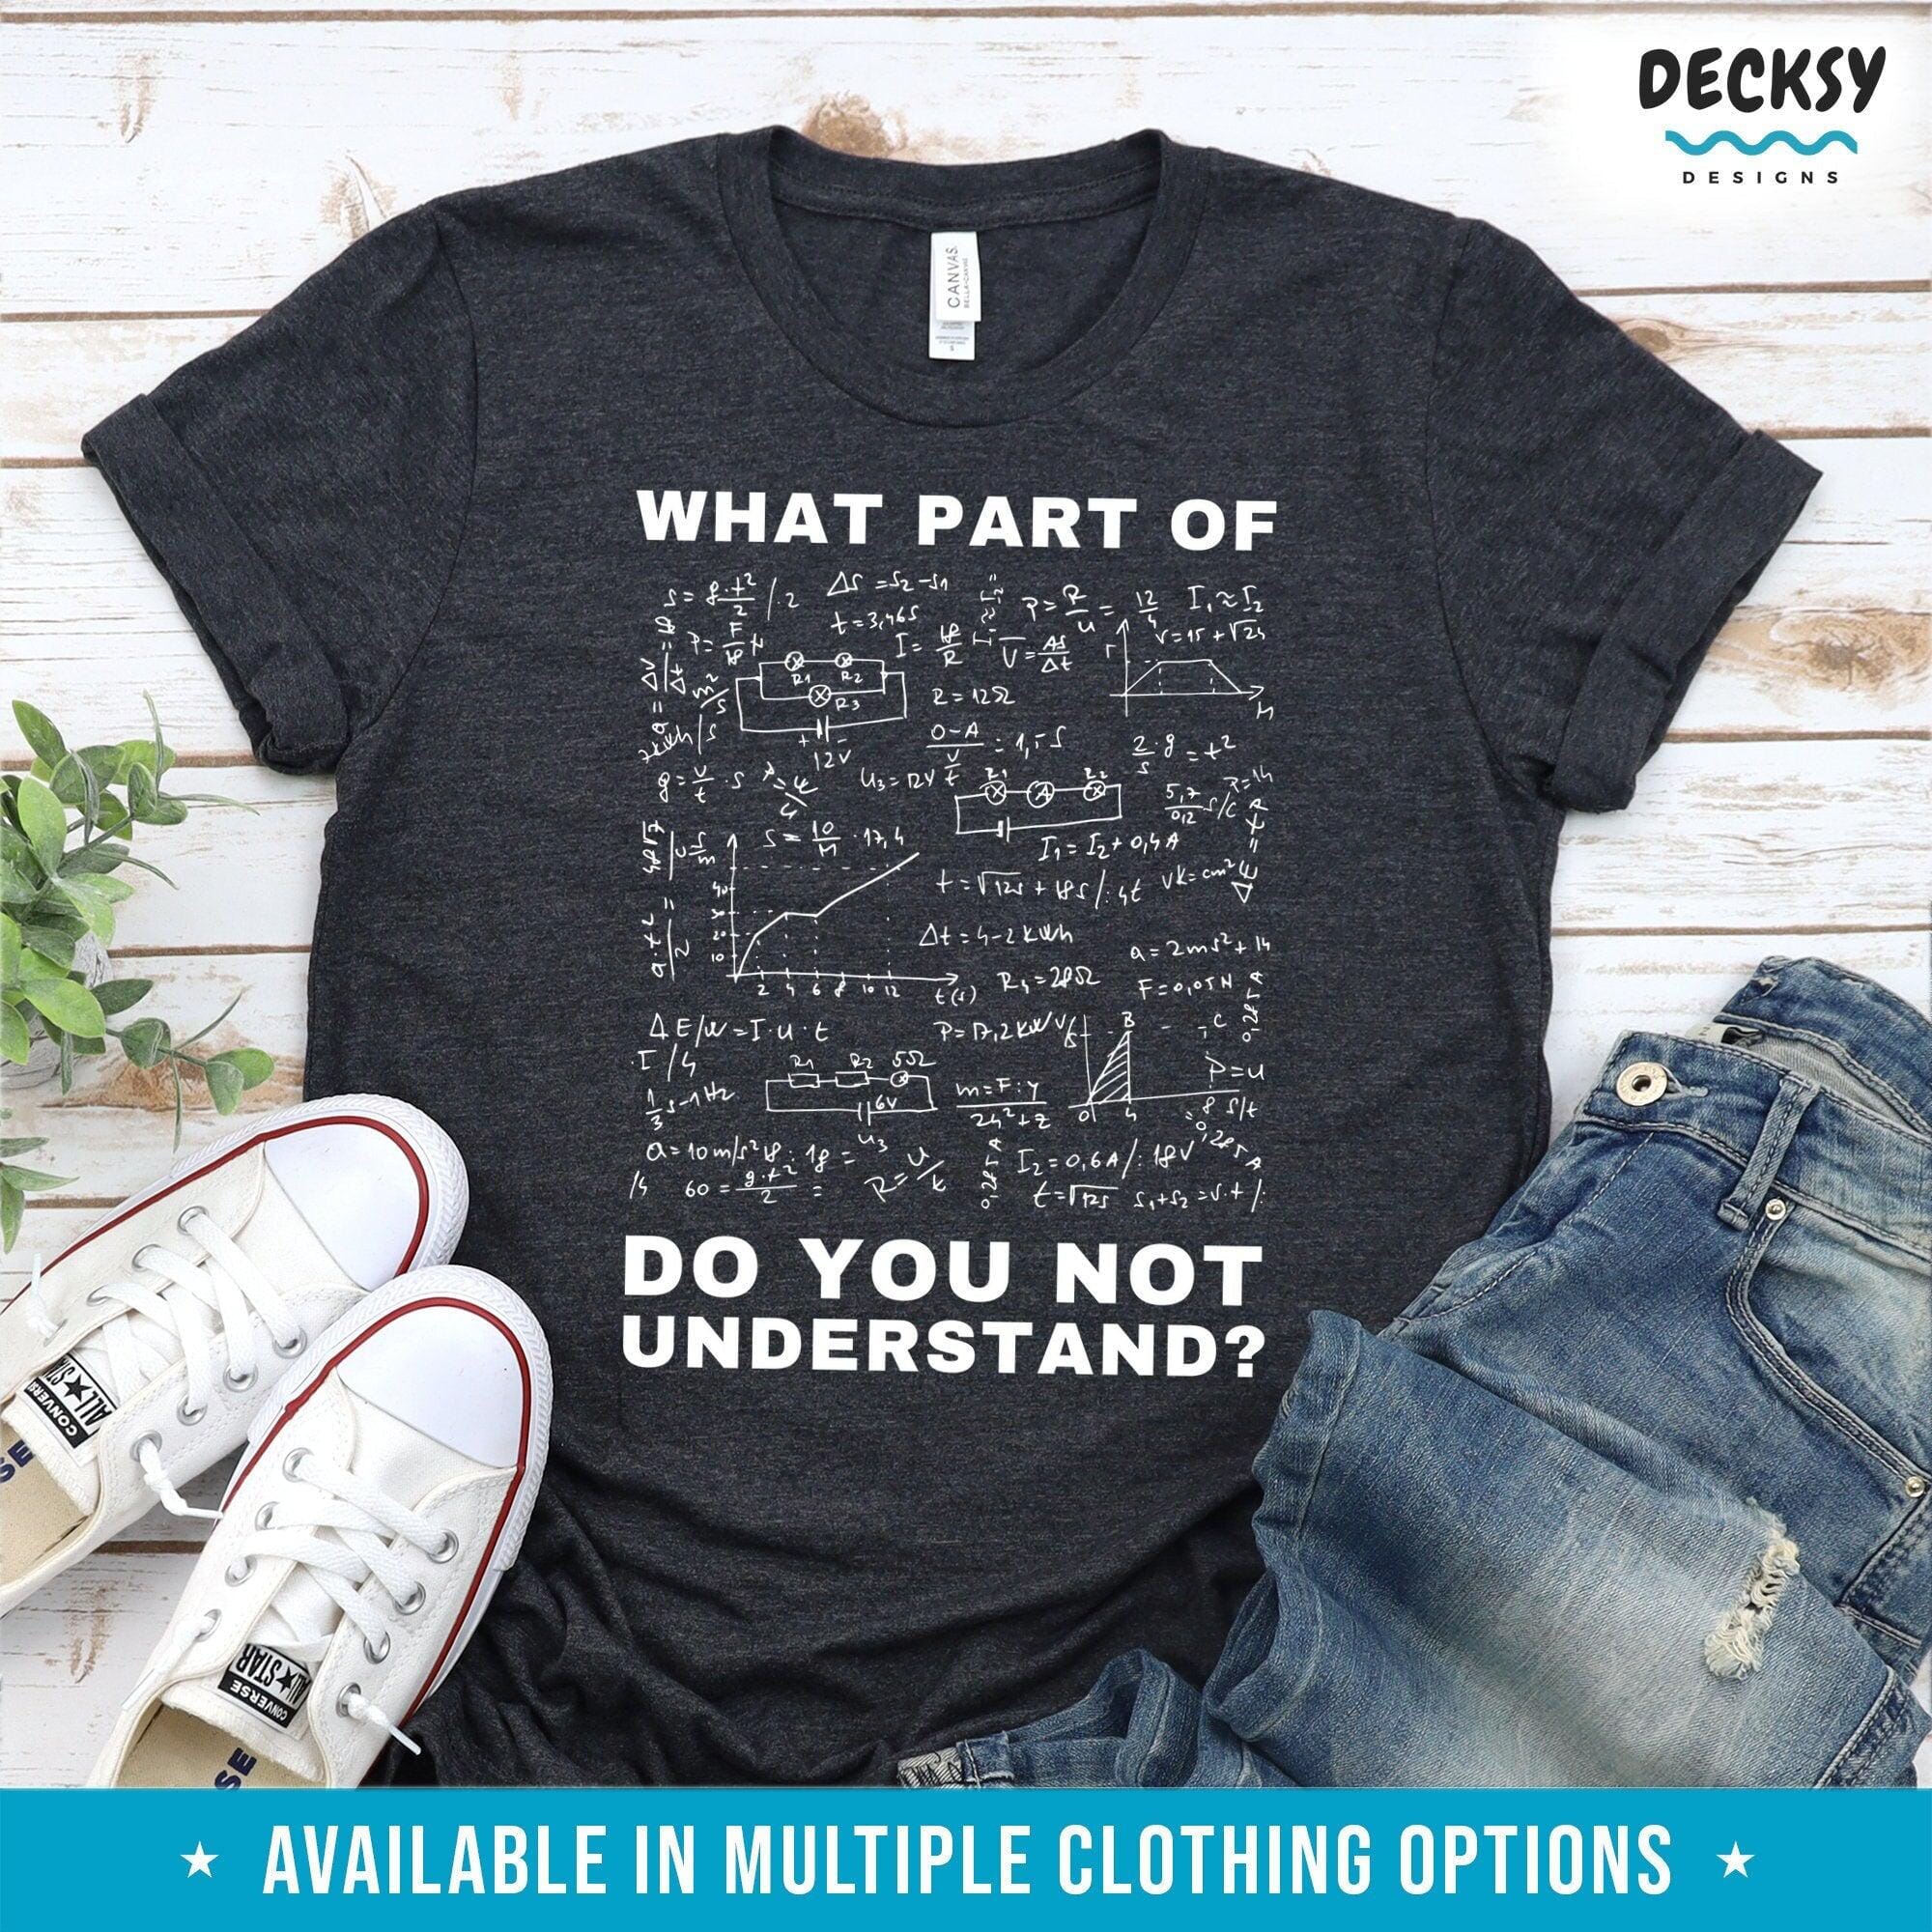 Physics Shirt, Science Teacher Gift-Clothing:Gender-Neutral Adult Clothing:Tops & Tees:T-shirts:Graphic Tees-DecksyDesigns